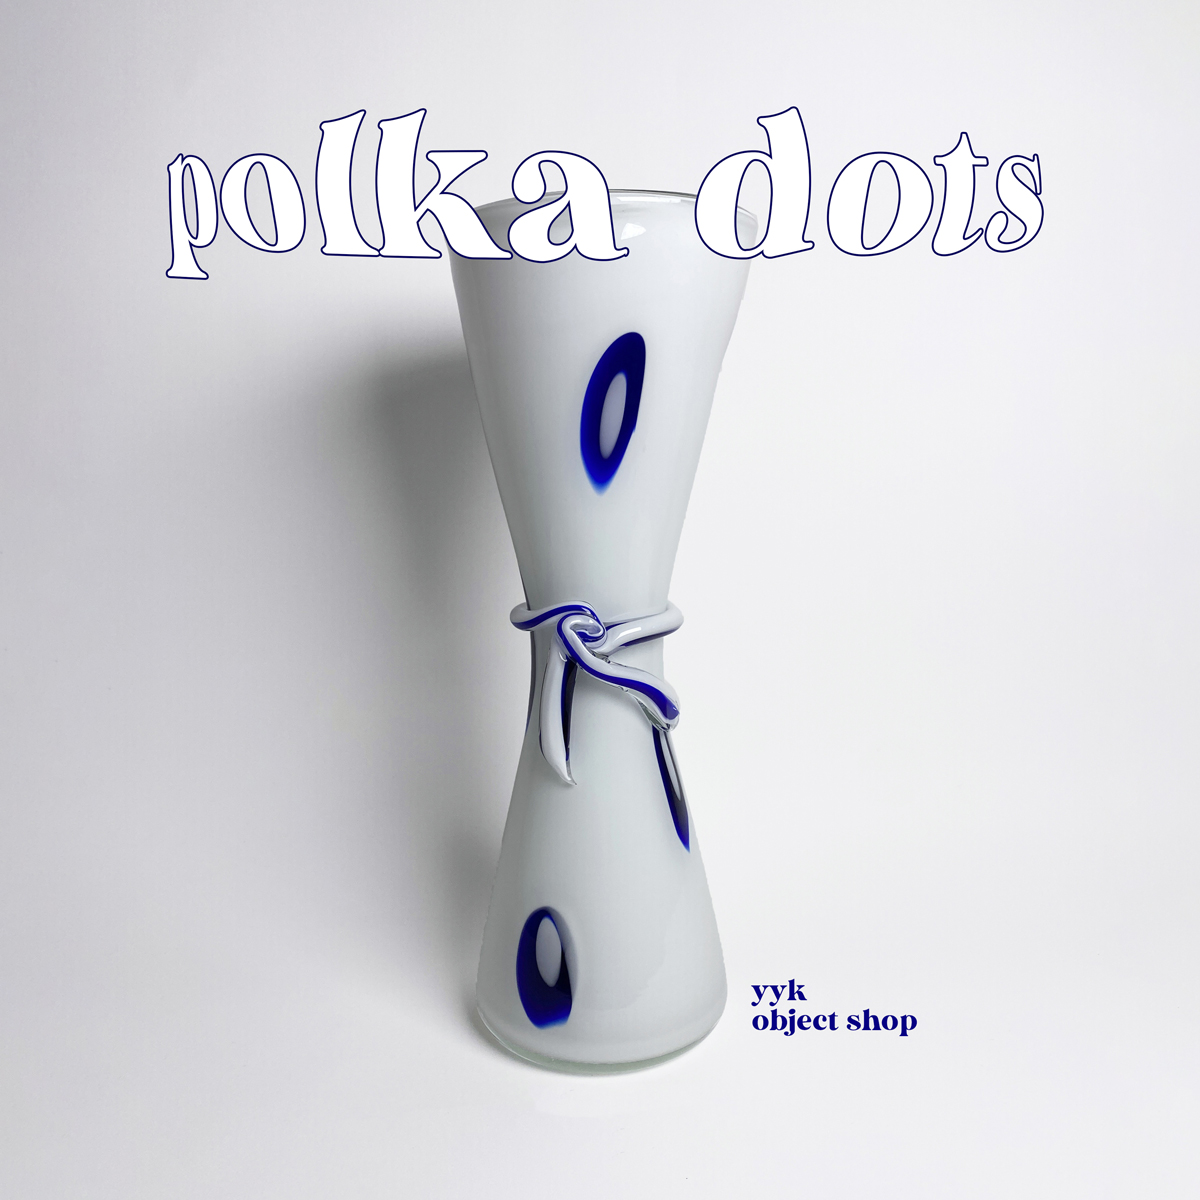 [Blue POLKA DOTS and White glass object]